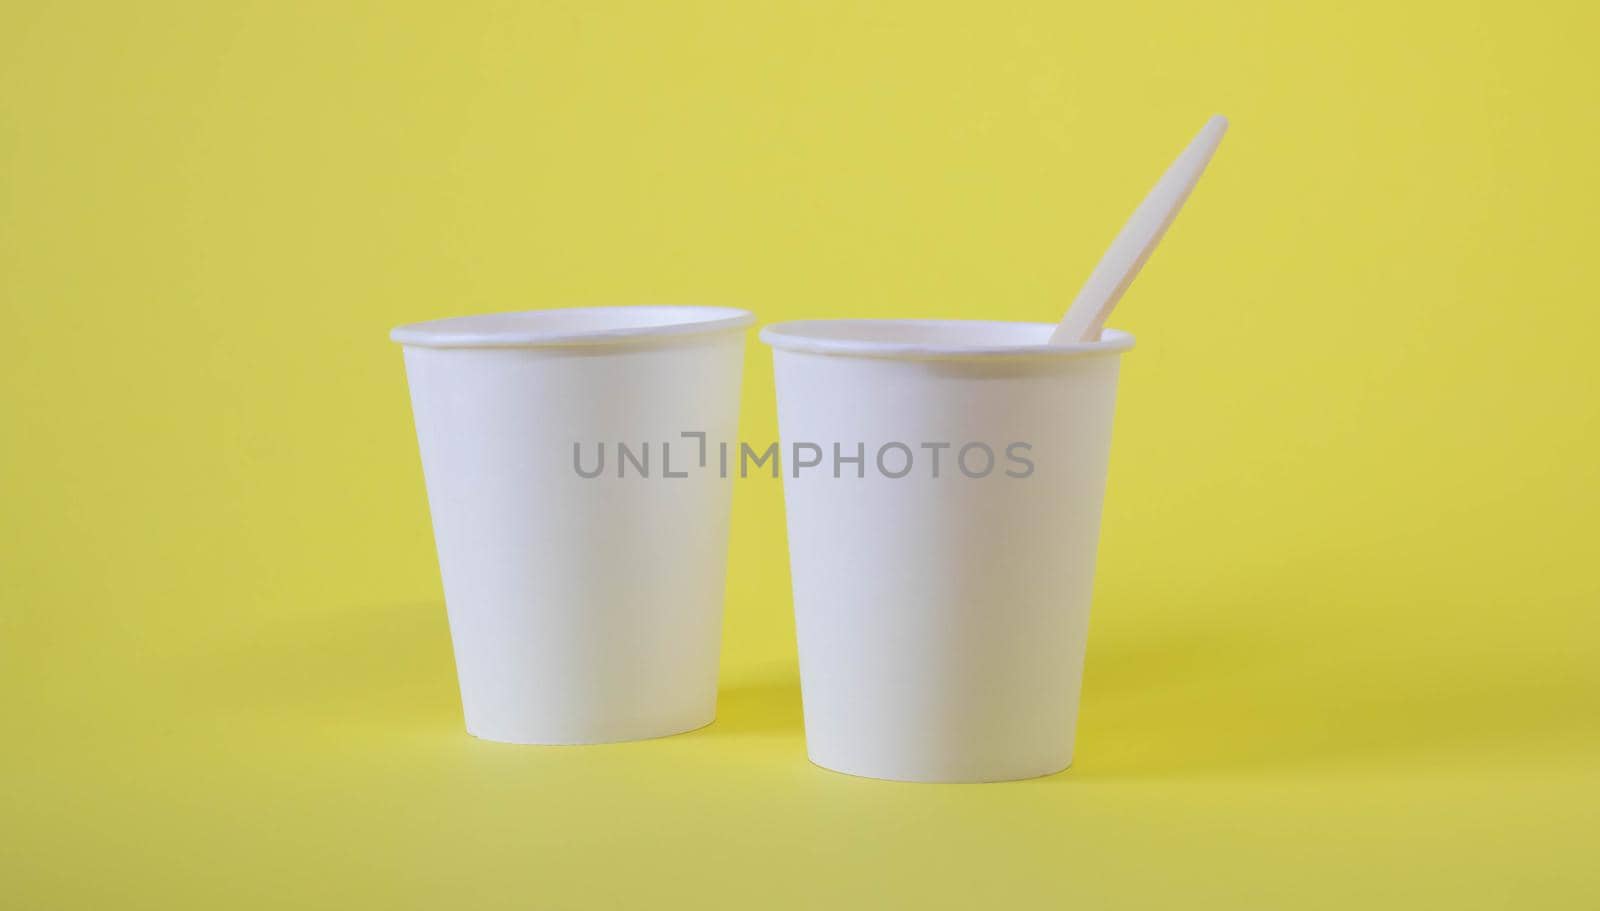 Two small white paper cups on a yellow background by lapushka62